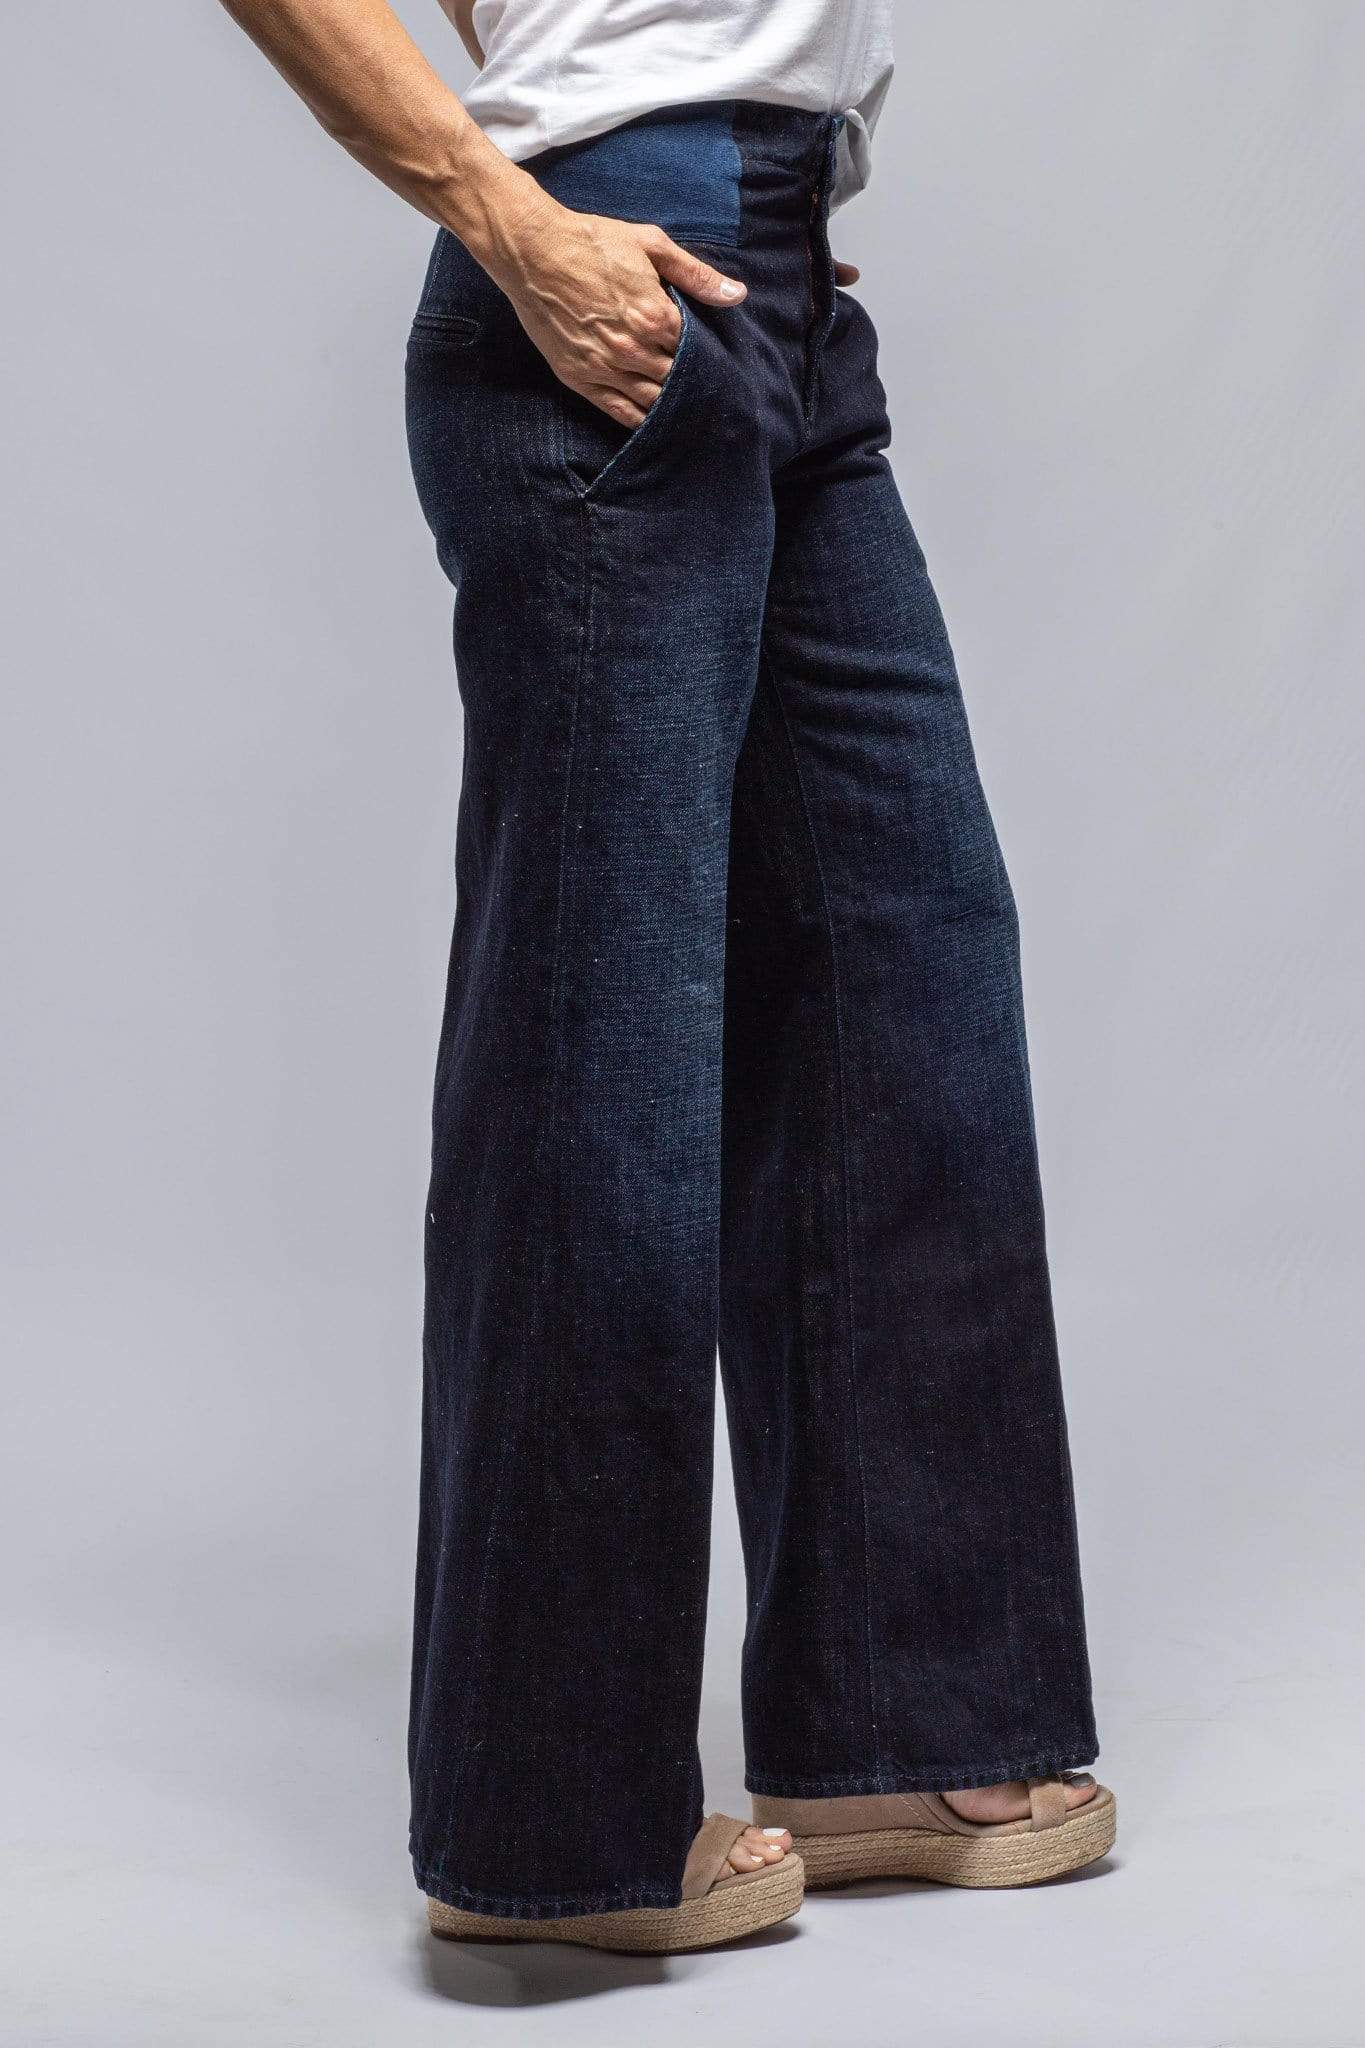 10 Chic Wide Leg Denim Jeans Ootds To Copy From Influencers | Preview.ph